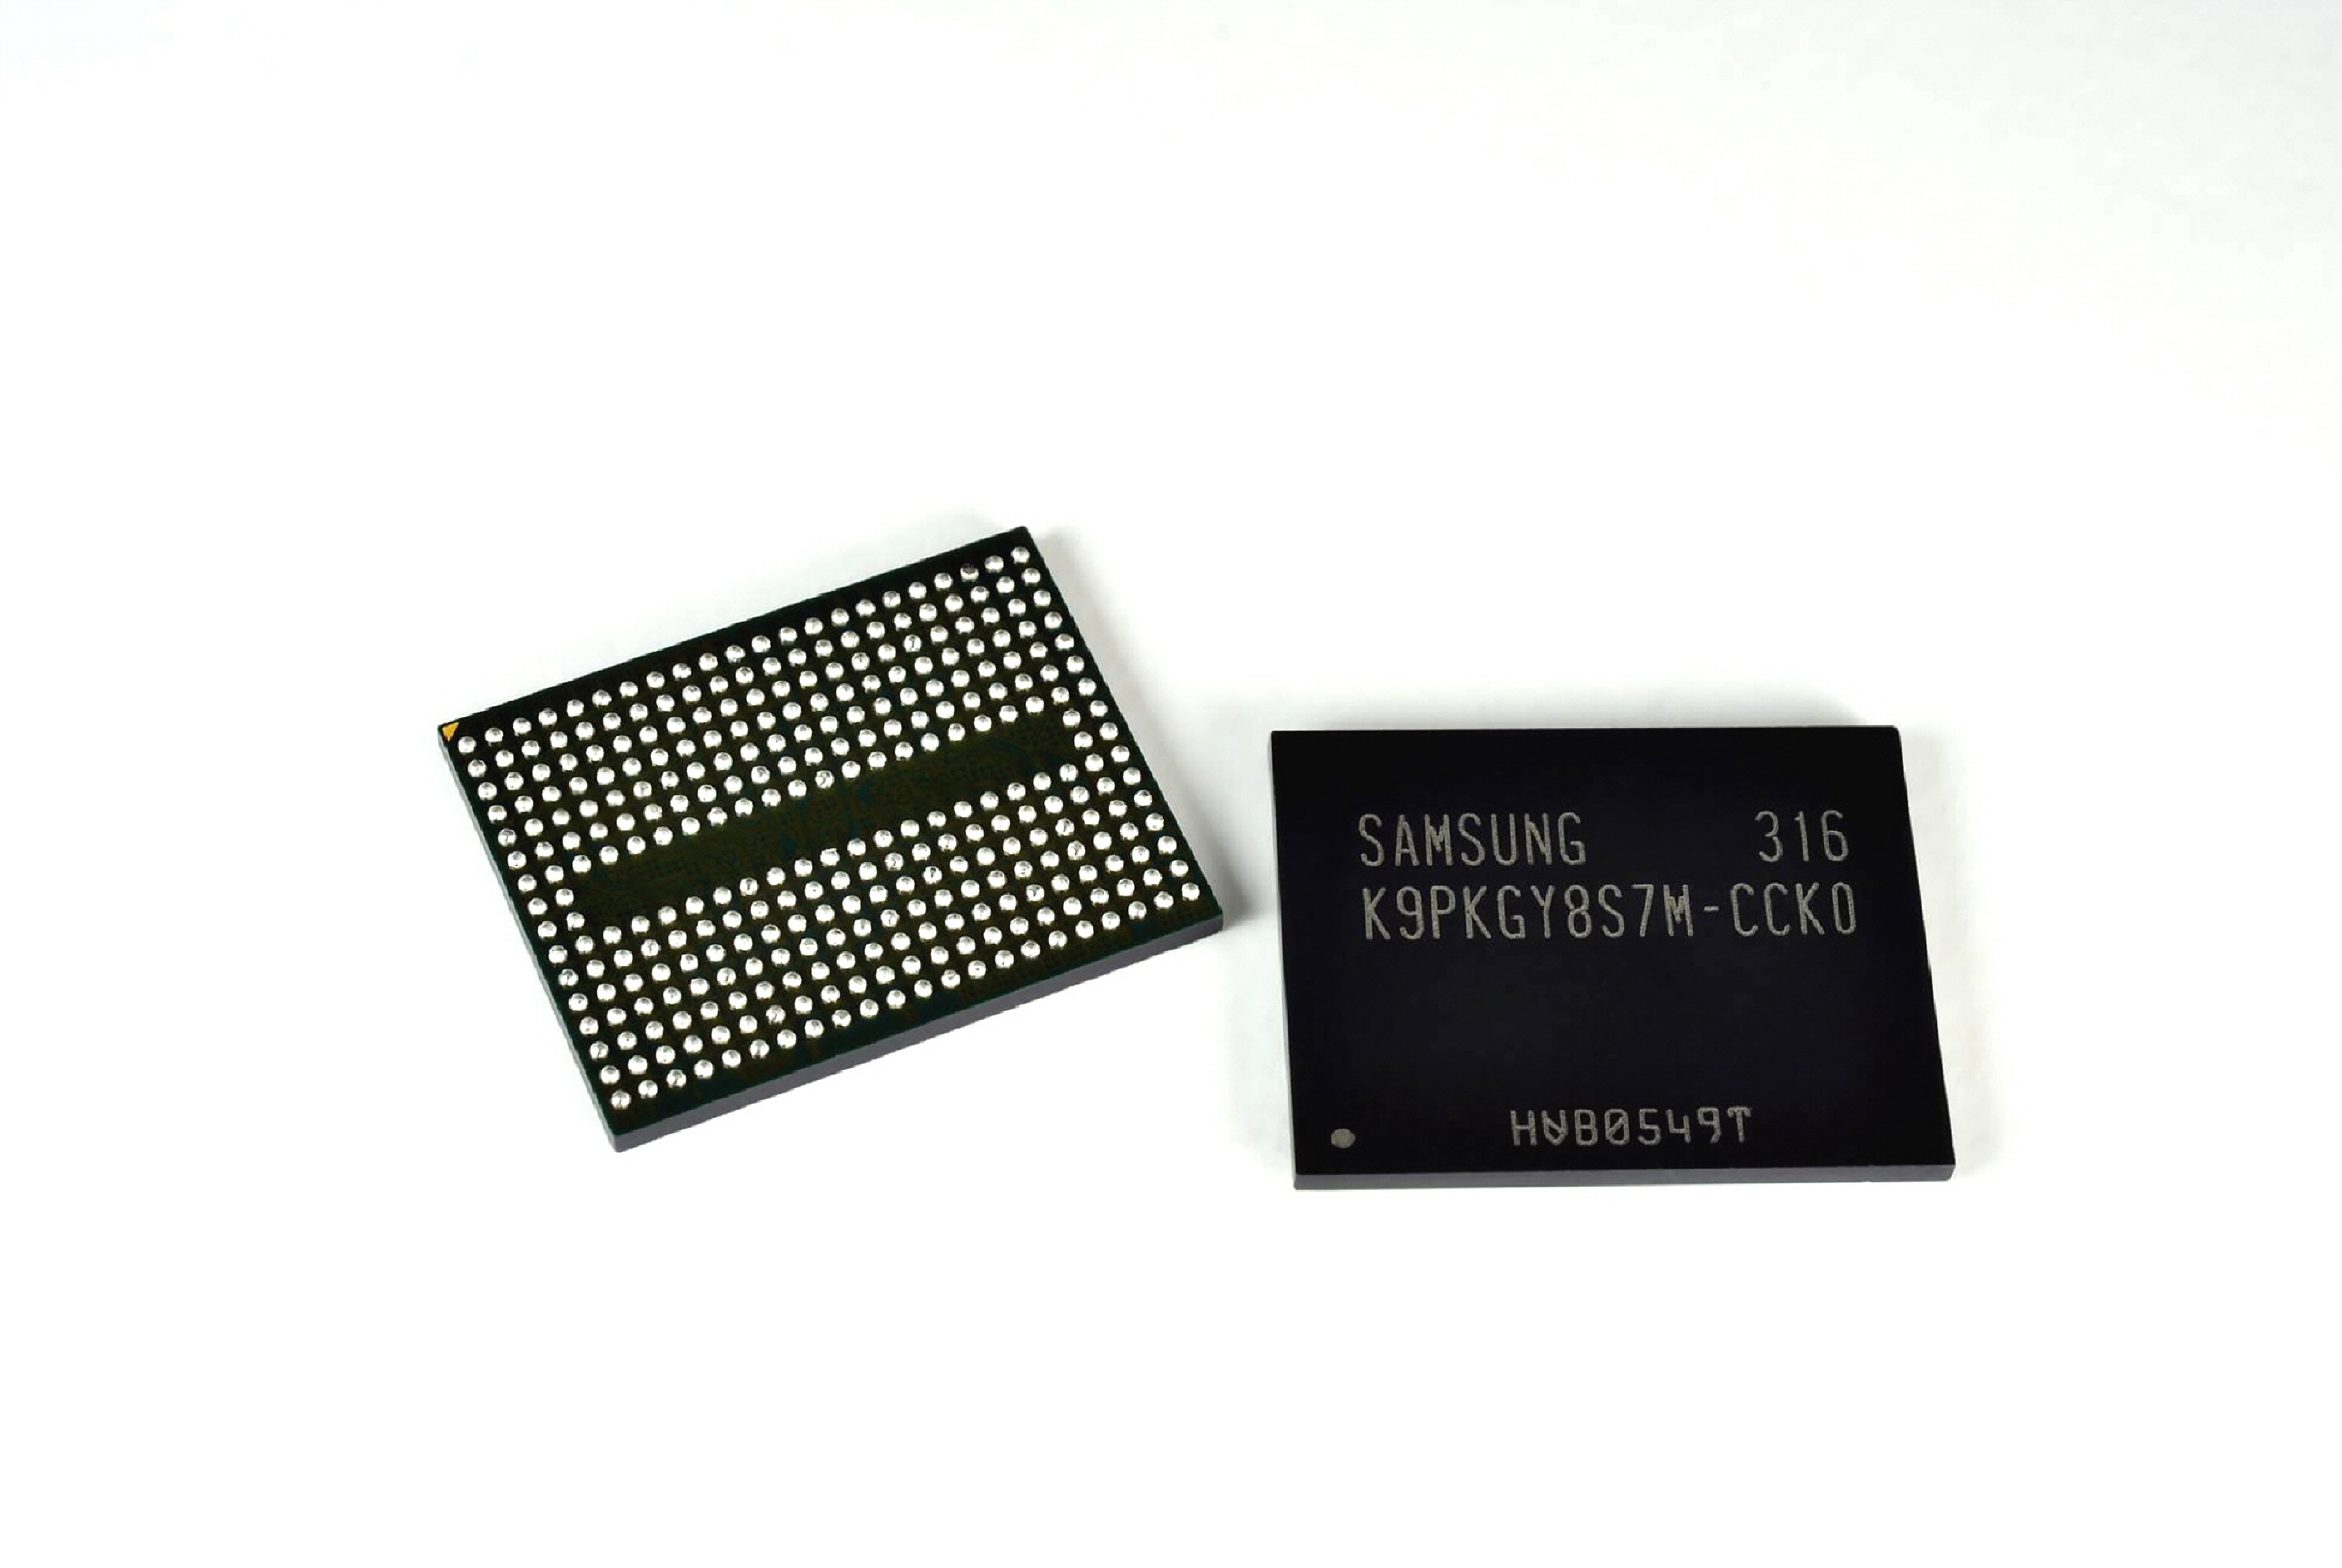 Samsung's “3D Vertical” NAND crams a terabit on a single chip | Ars Technica